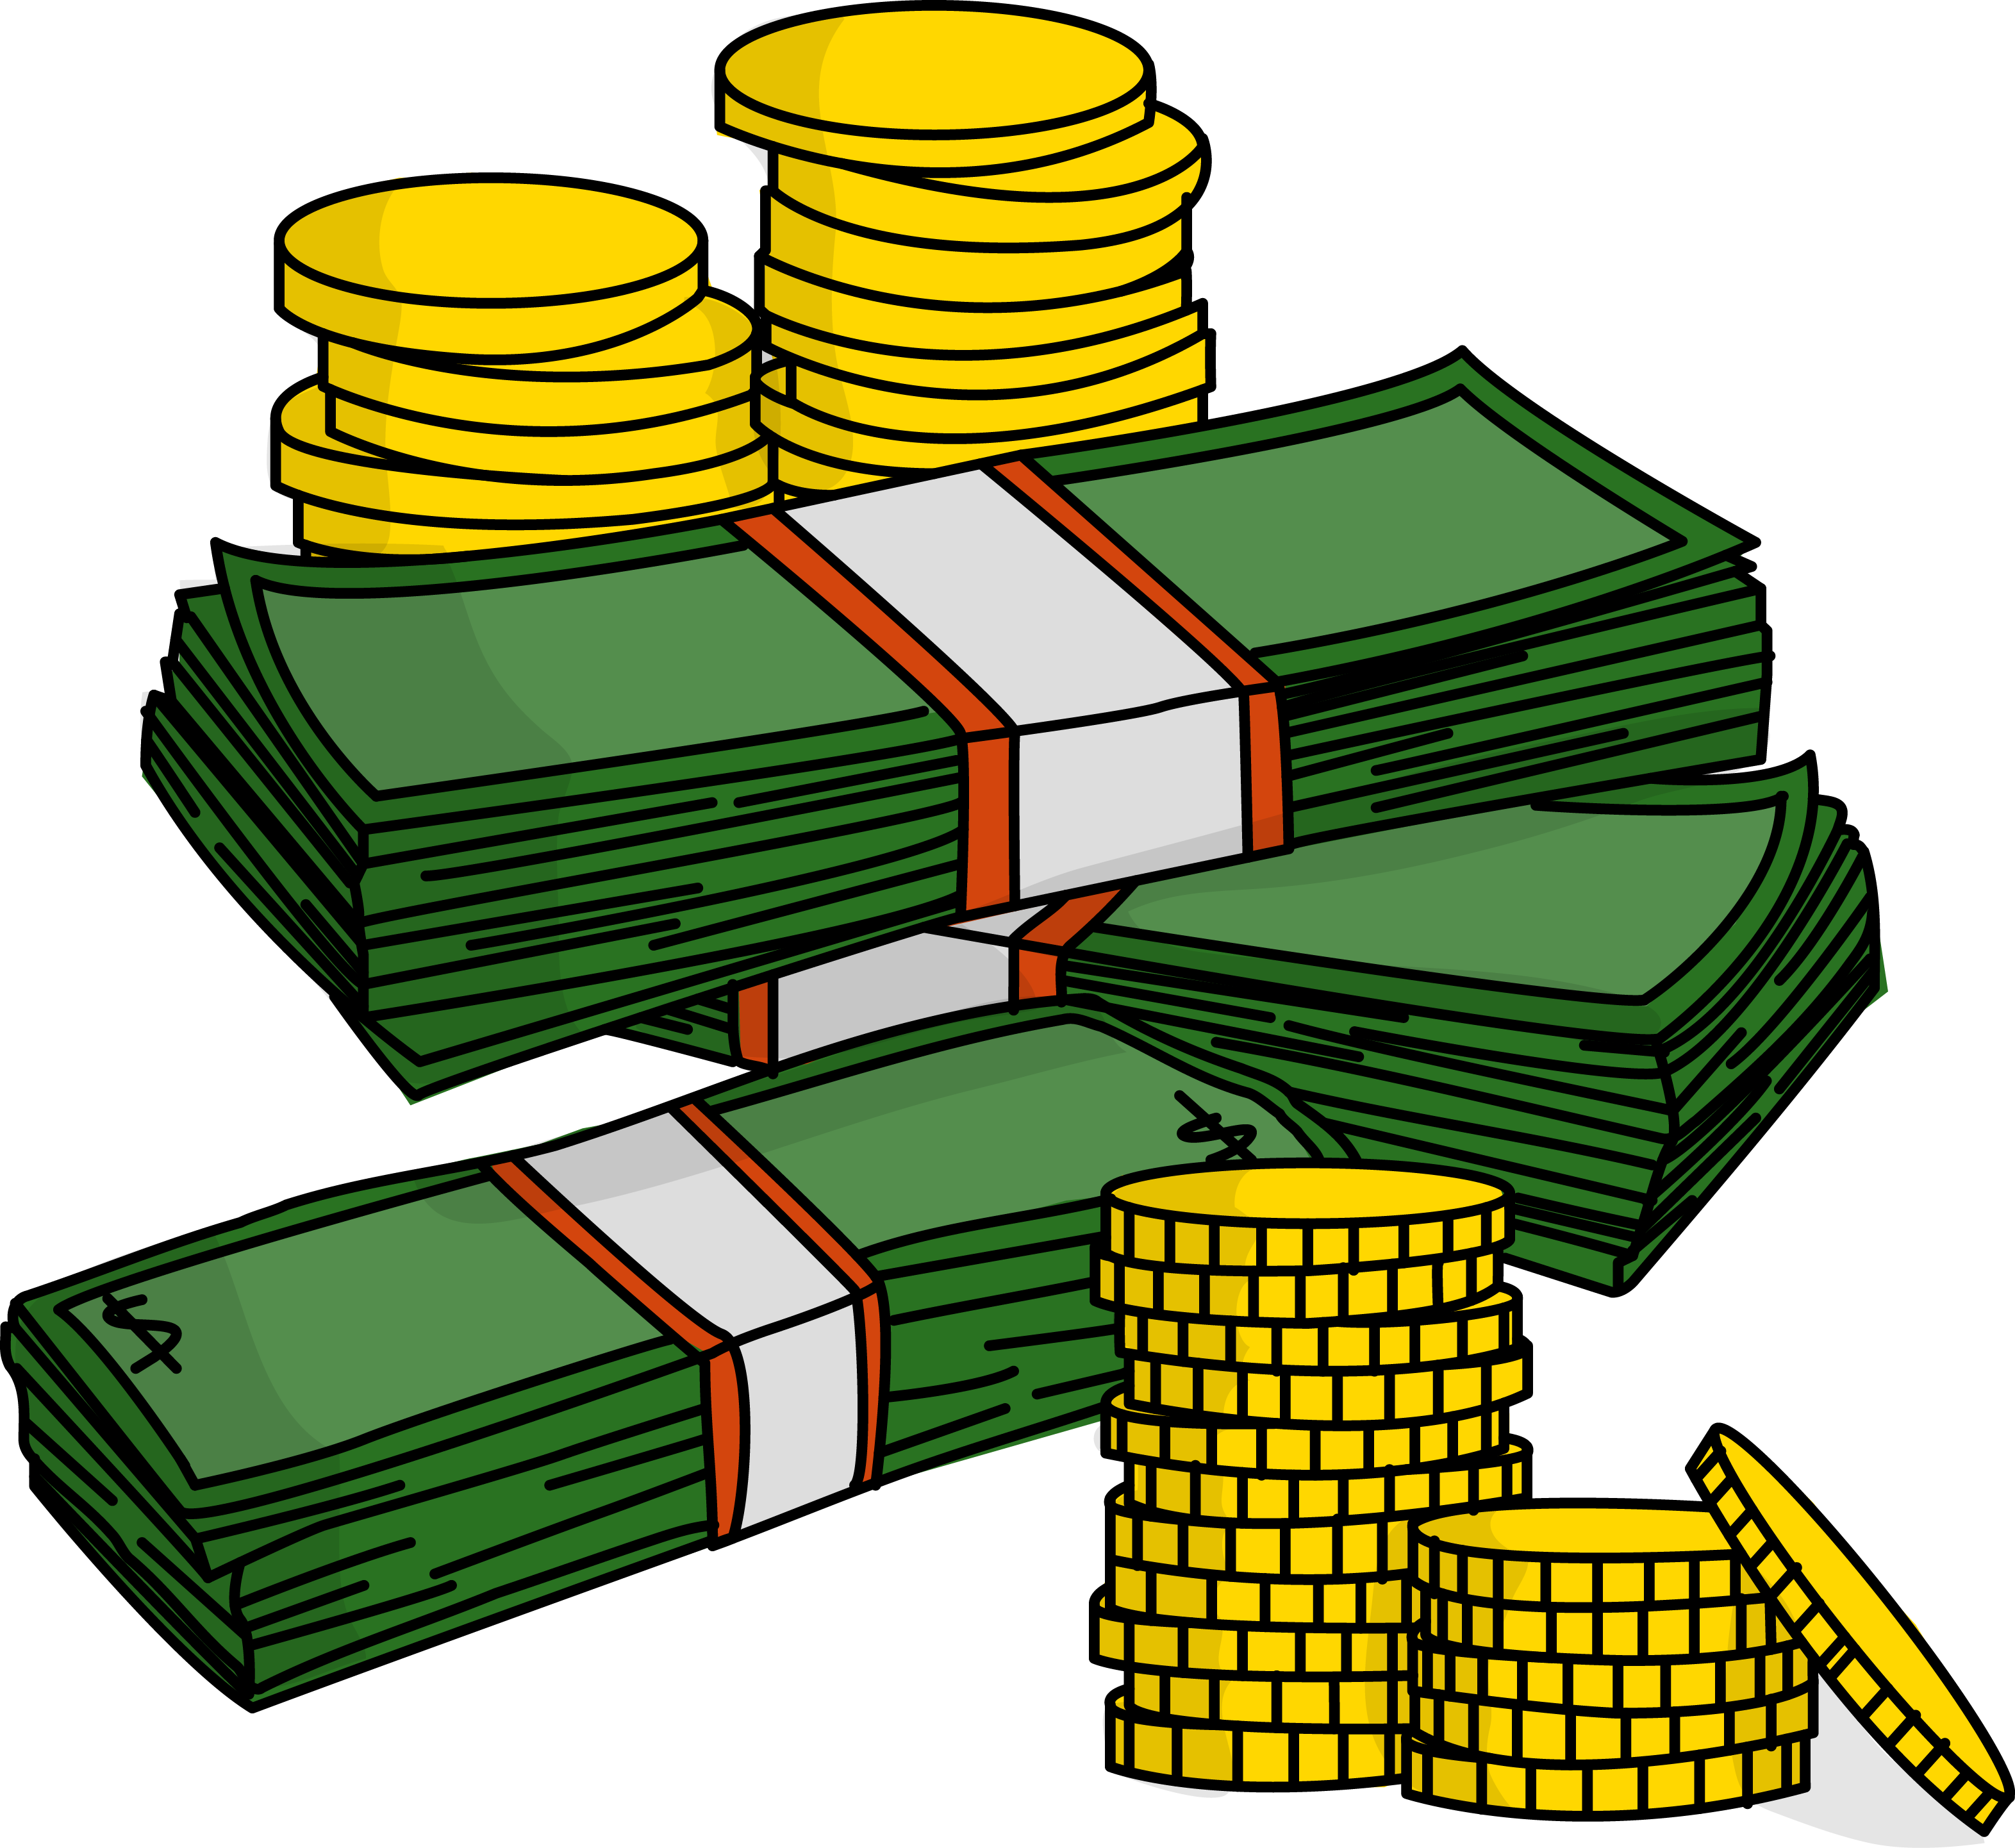 Free Stacks Of Money With Coins High Resolution Clip Art | All ..